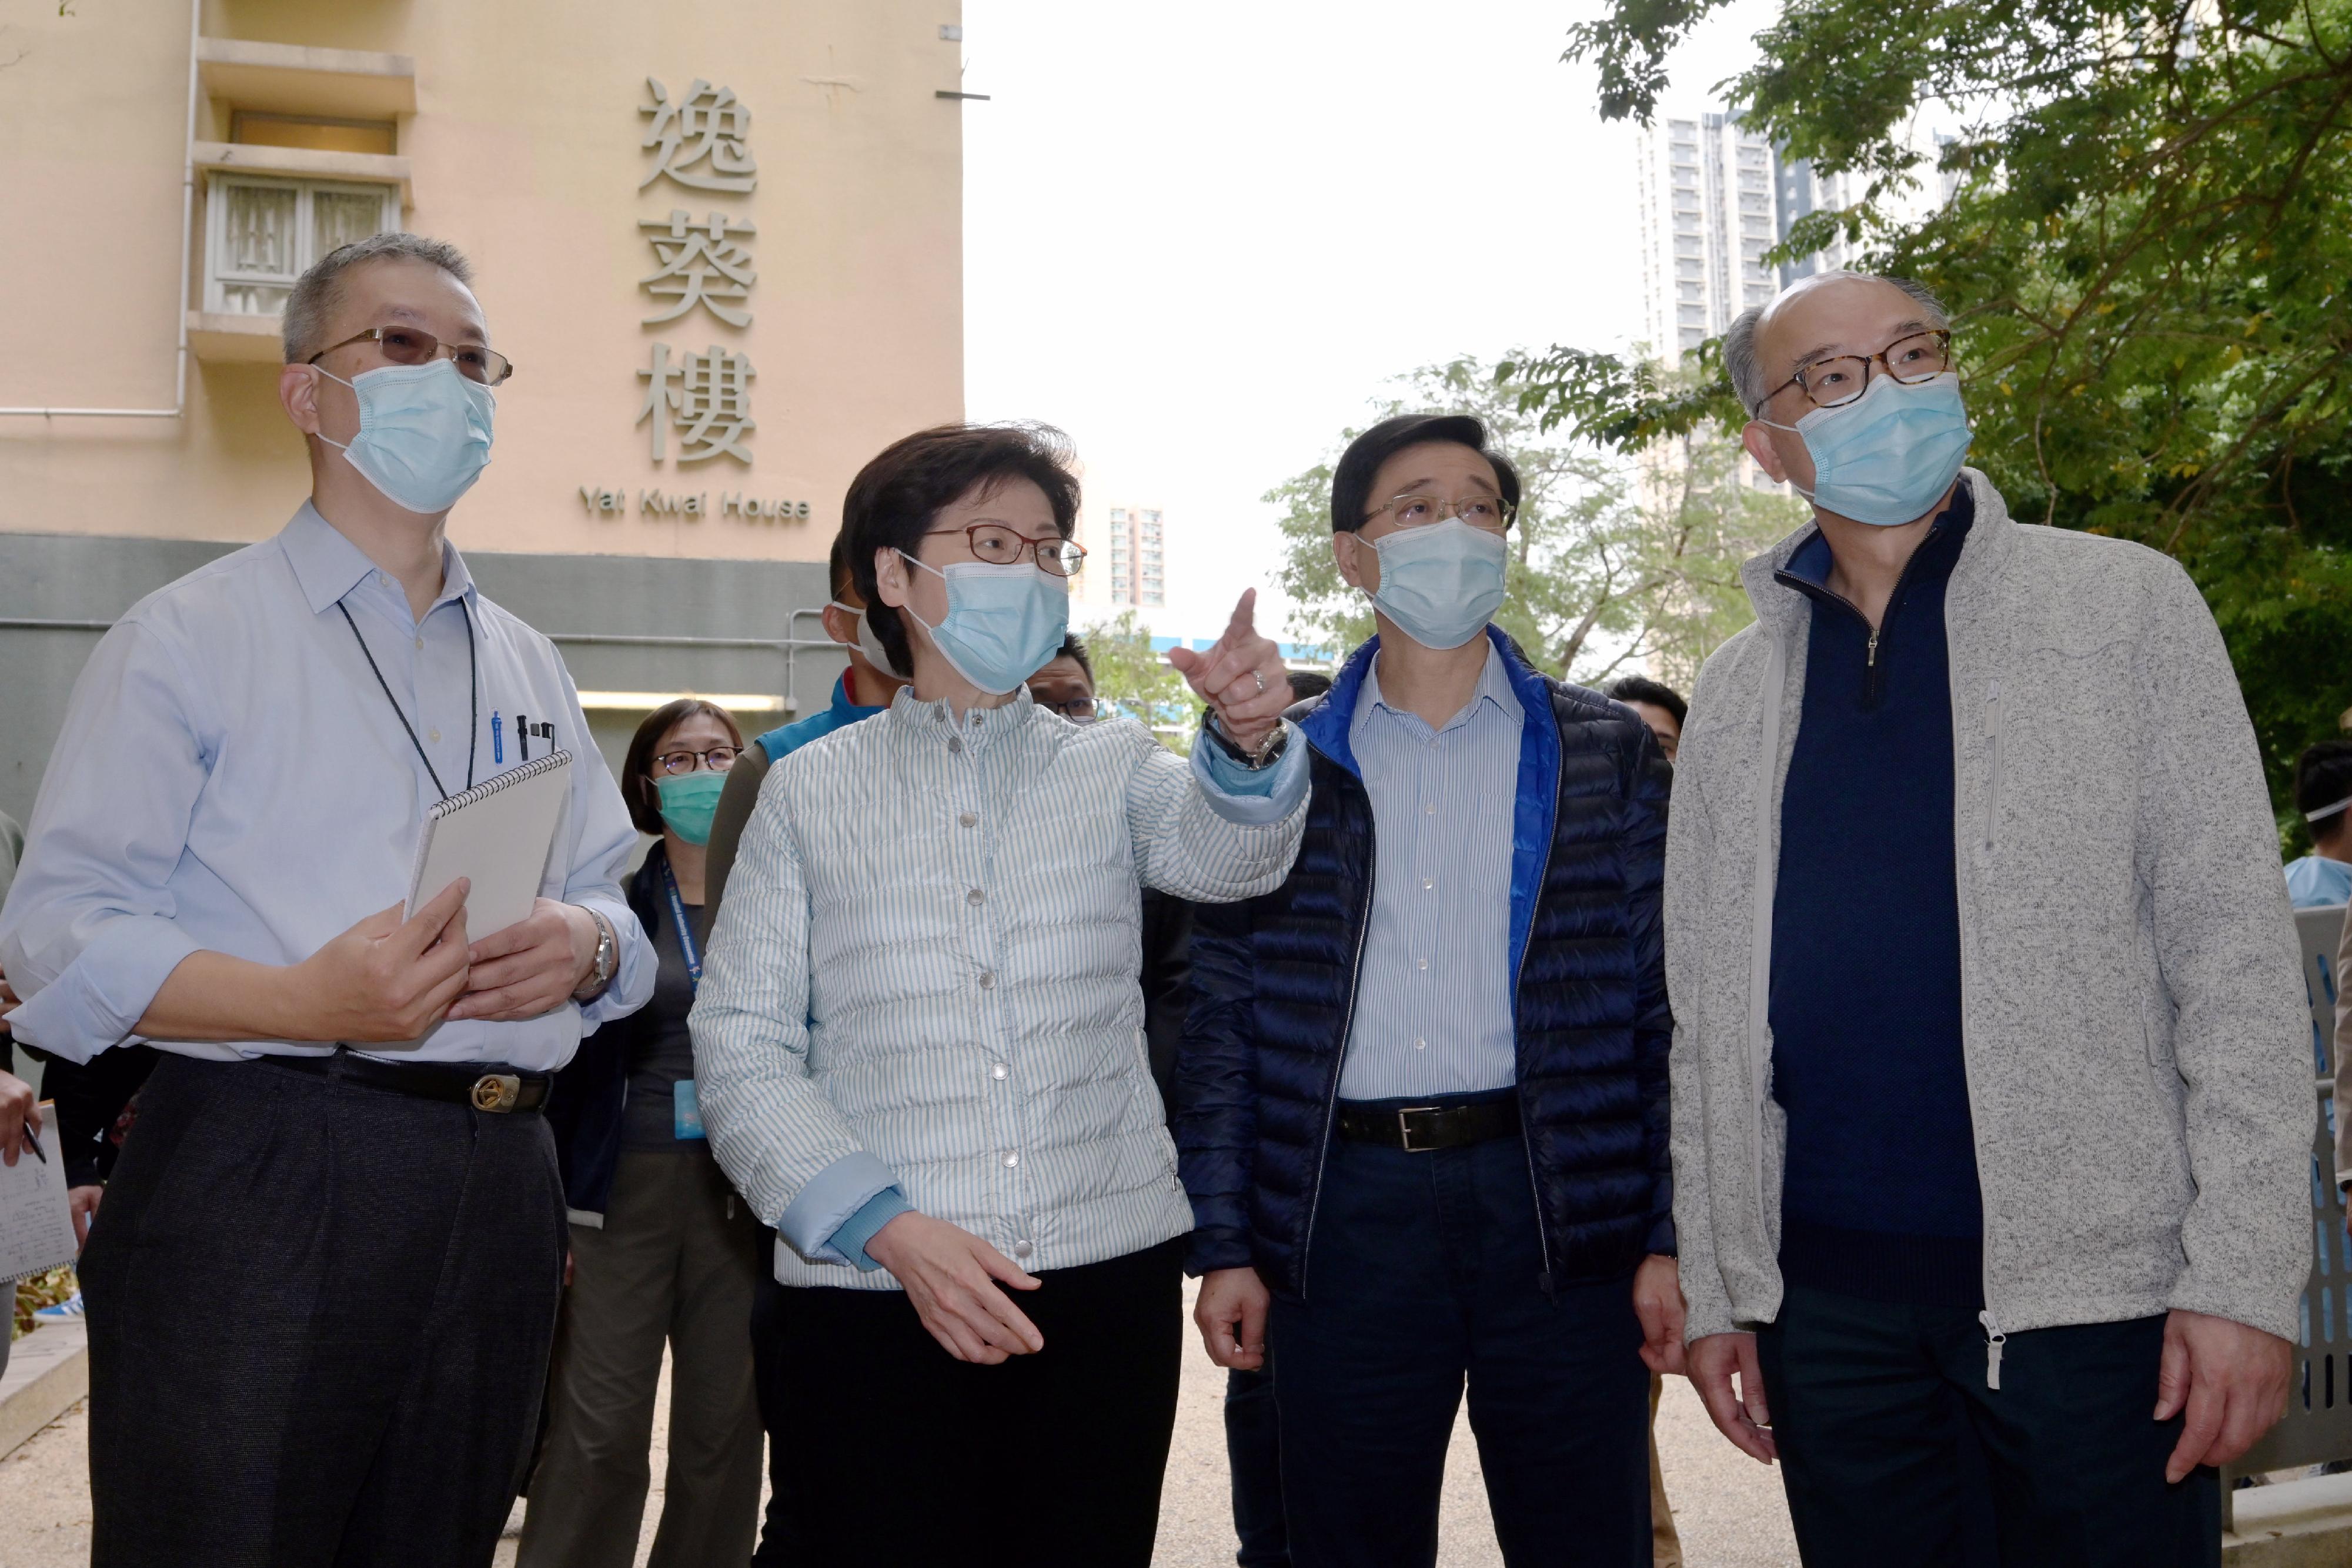 The Chief Executive, Mrs Carrie Lam (second left), today (January 23) inspects operations at Kwai Chung Estate in relation to the "restriction-testing declarations" and compulsory testing notices in response to COVID-19. Looking on are the Chief Secretary for Administration, Mr John Lee (second right), and the Secretary for Transport and Housing, Mr Frank Chan Fan (first right).